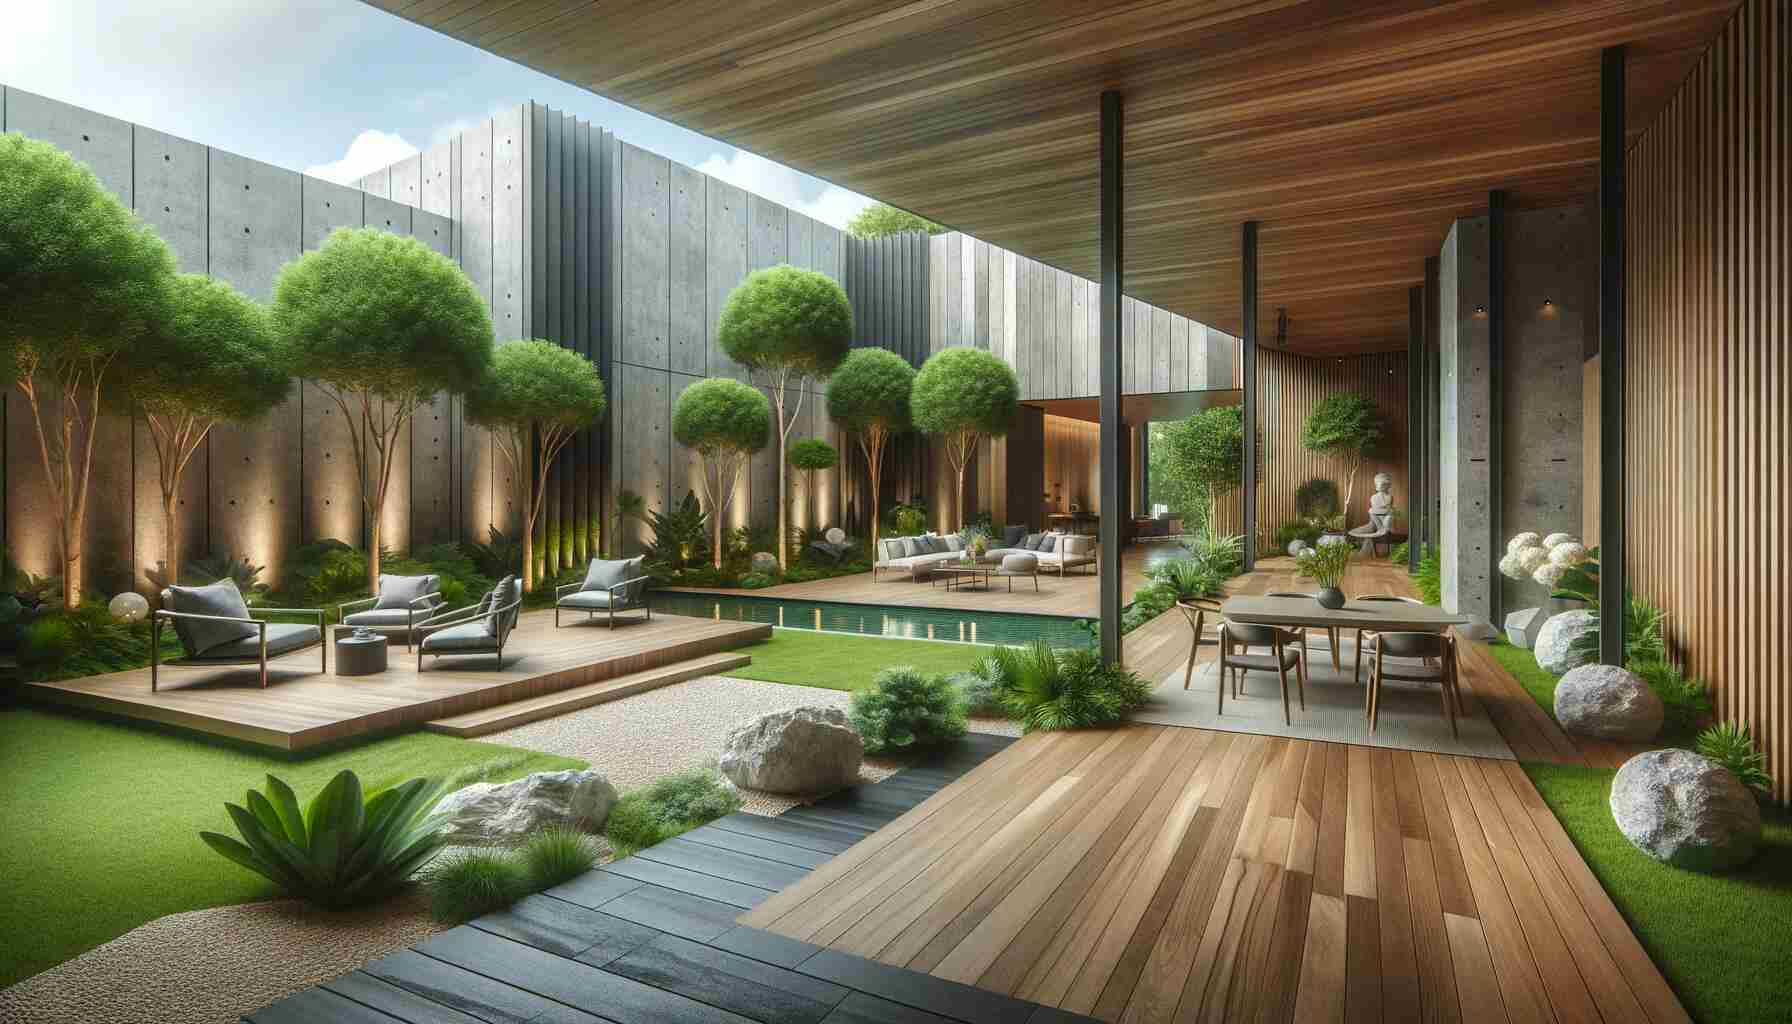 Here is the featured image for “Organic Modern: Merging Nature with Contemporary Design,” showcasing an elegant outdoor space that beautifully blends contemporary design with natural elements.